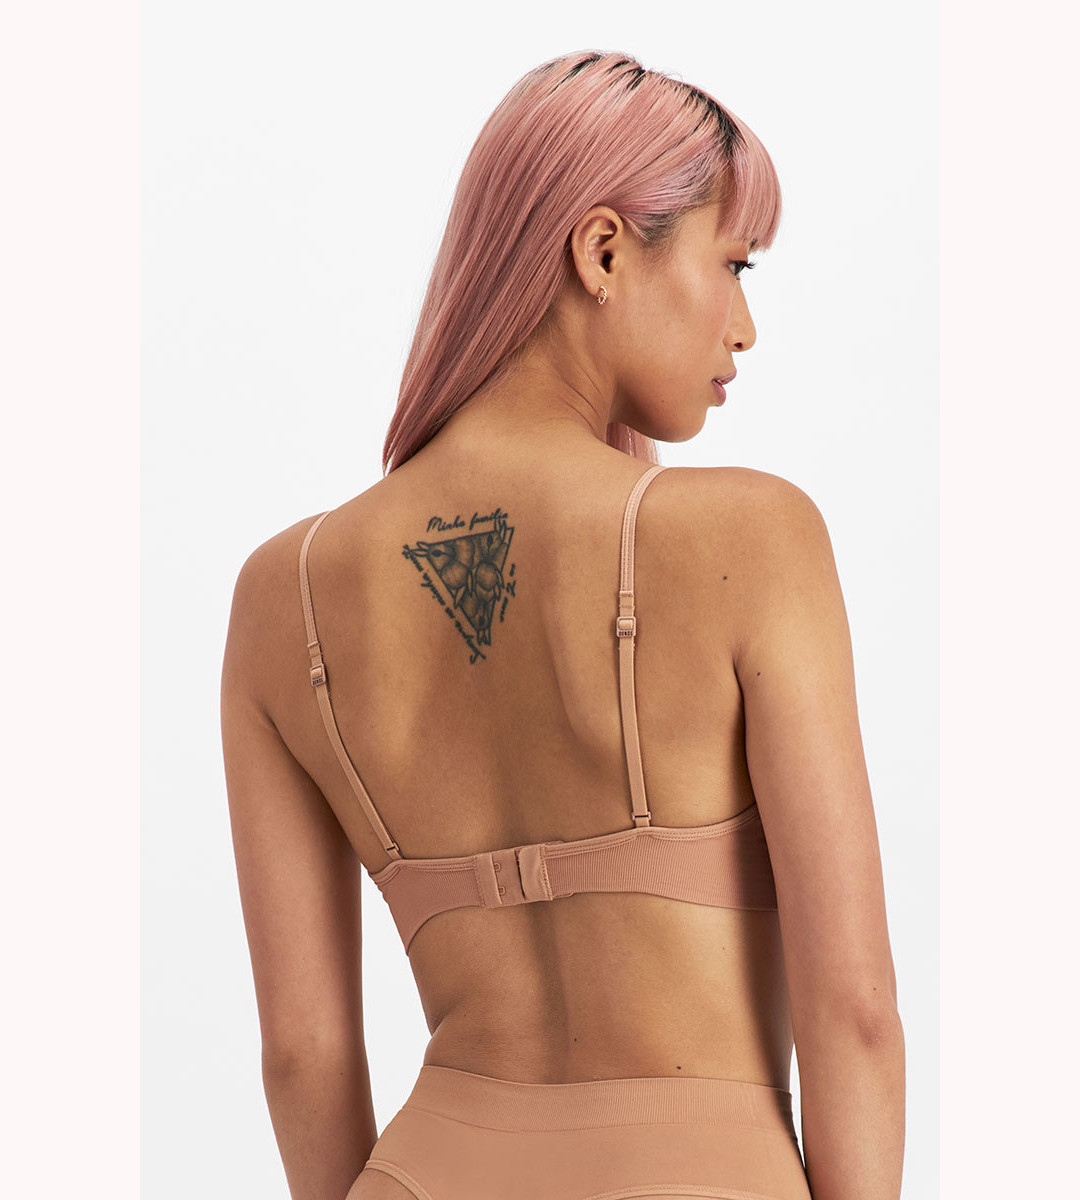 – New Zealand's online shop for bras and lingerie.